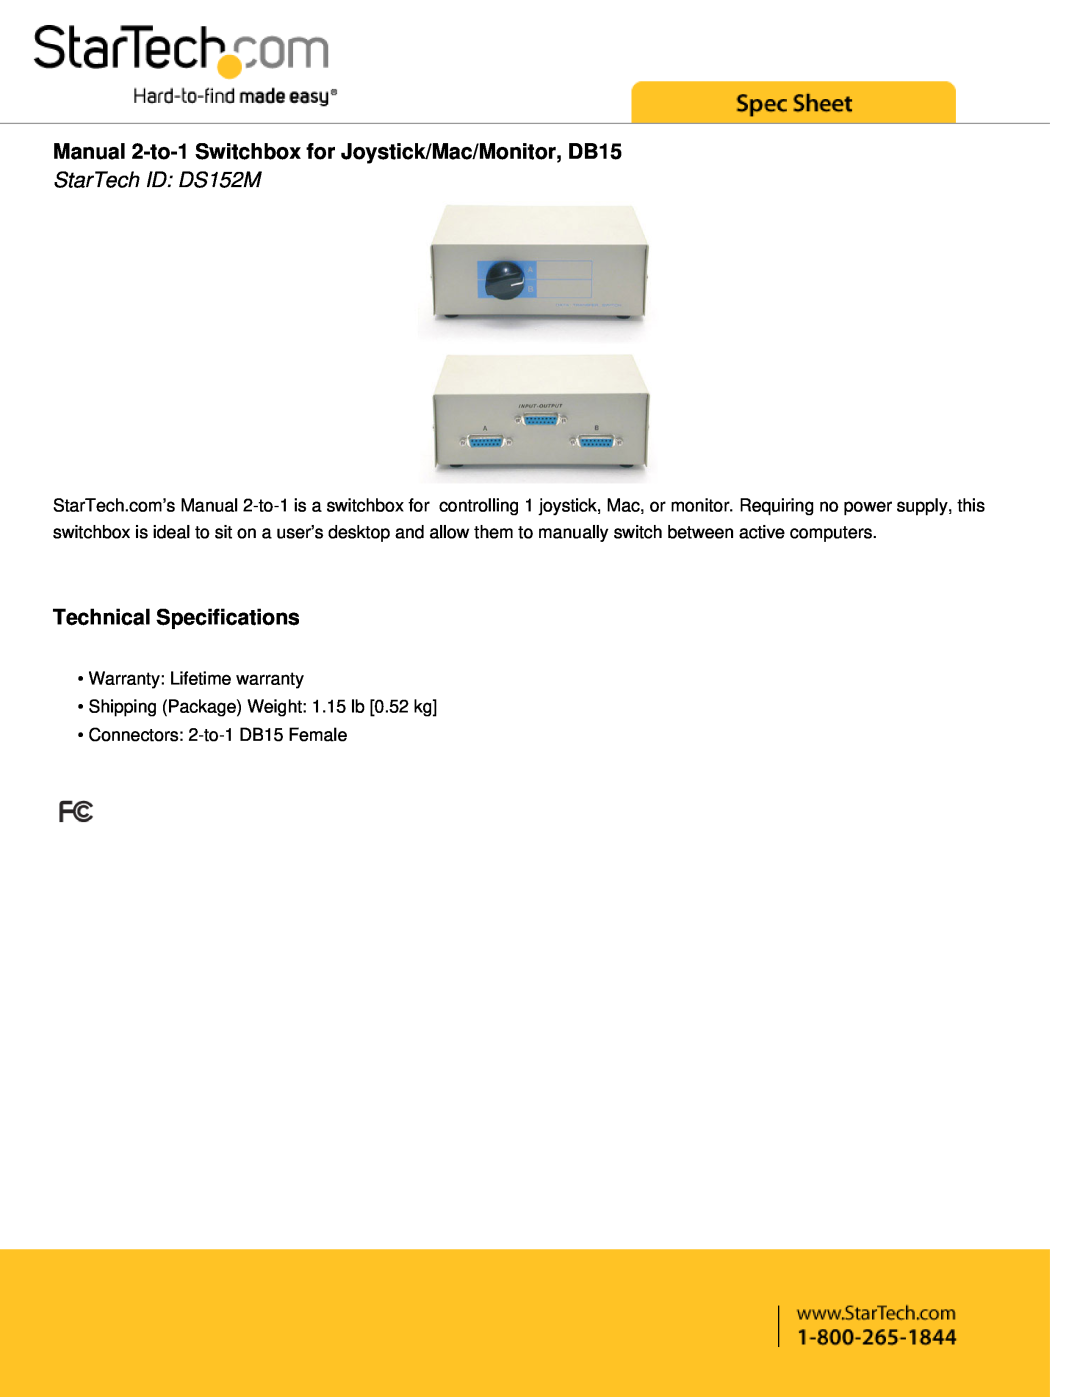 StarTech.com technical specifications Manual 2-to-1 Switchbox for Joystick/Mac/Monitor, DB15, StarTech ID DS152M 